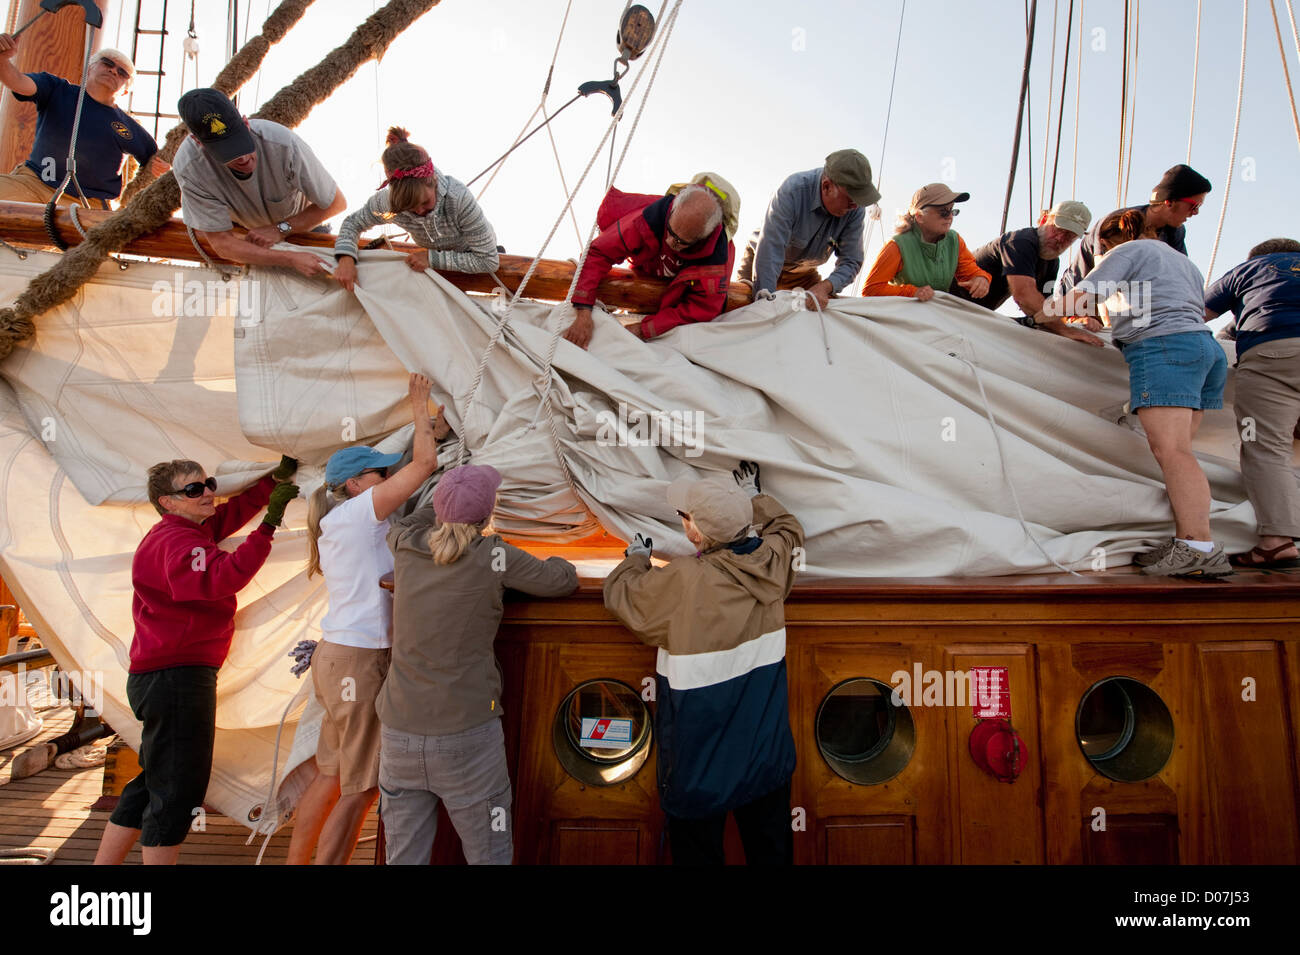 Crew members aboard the historic schooner 'Zodiac' put away the sails after a sailboat race in Port Townsend, Washington, USA. Stock Photo